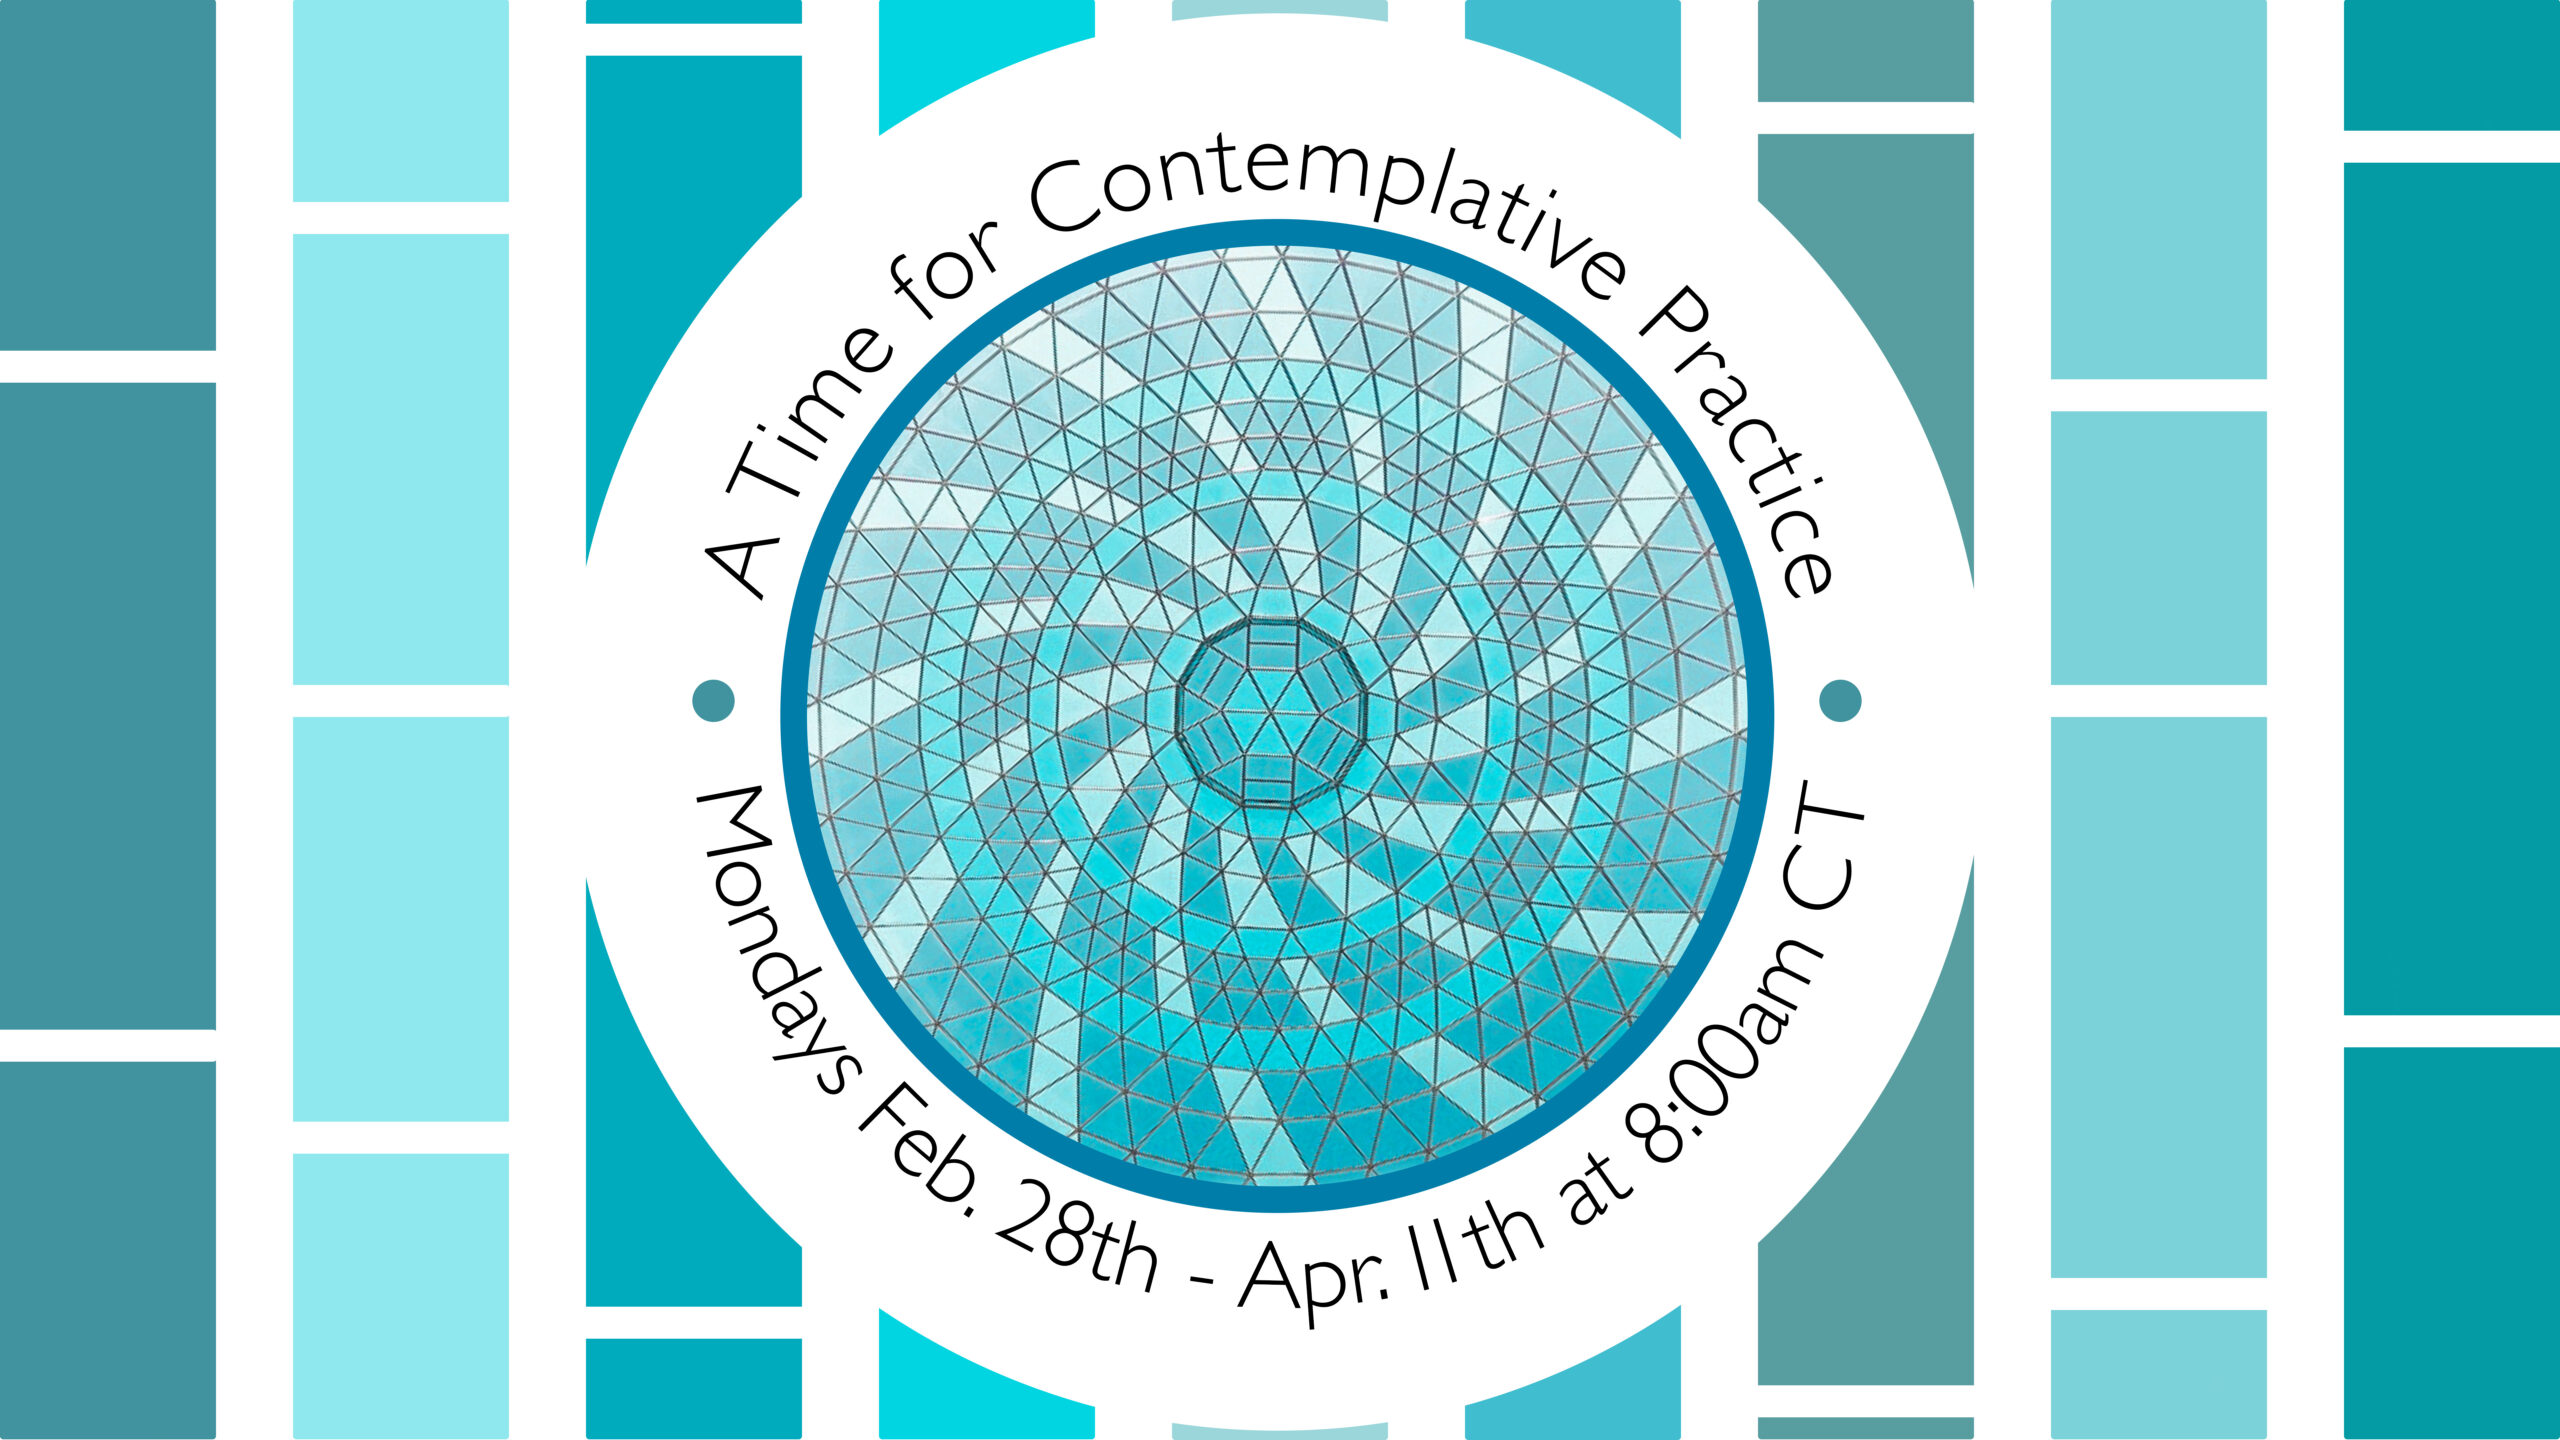 A Time for Contemplative Practice - Mondays Feb. 28th - Apr. 11th at 8:00am CT